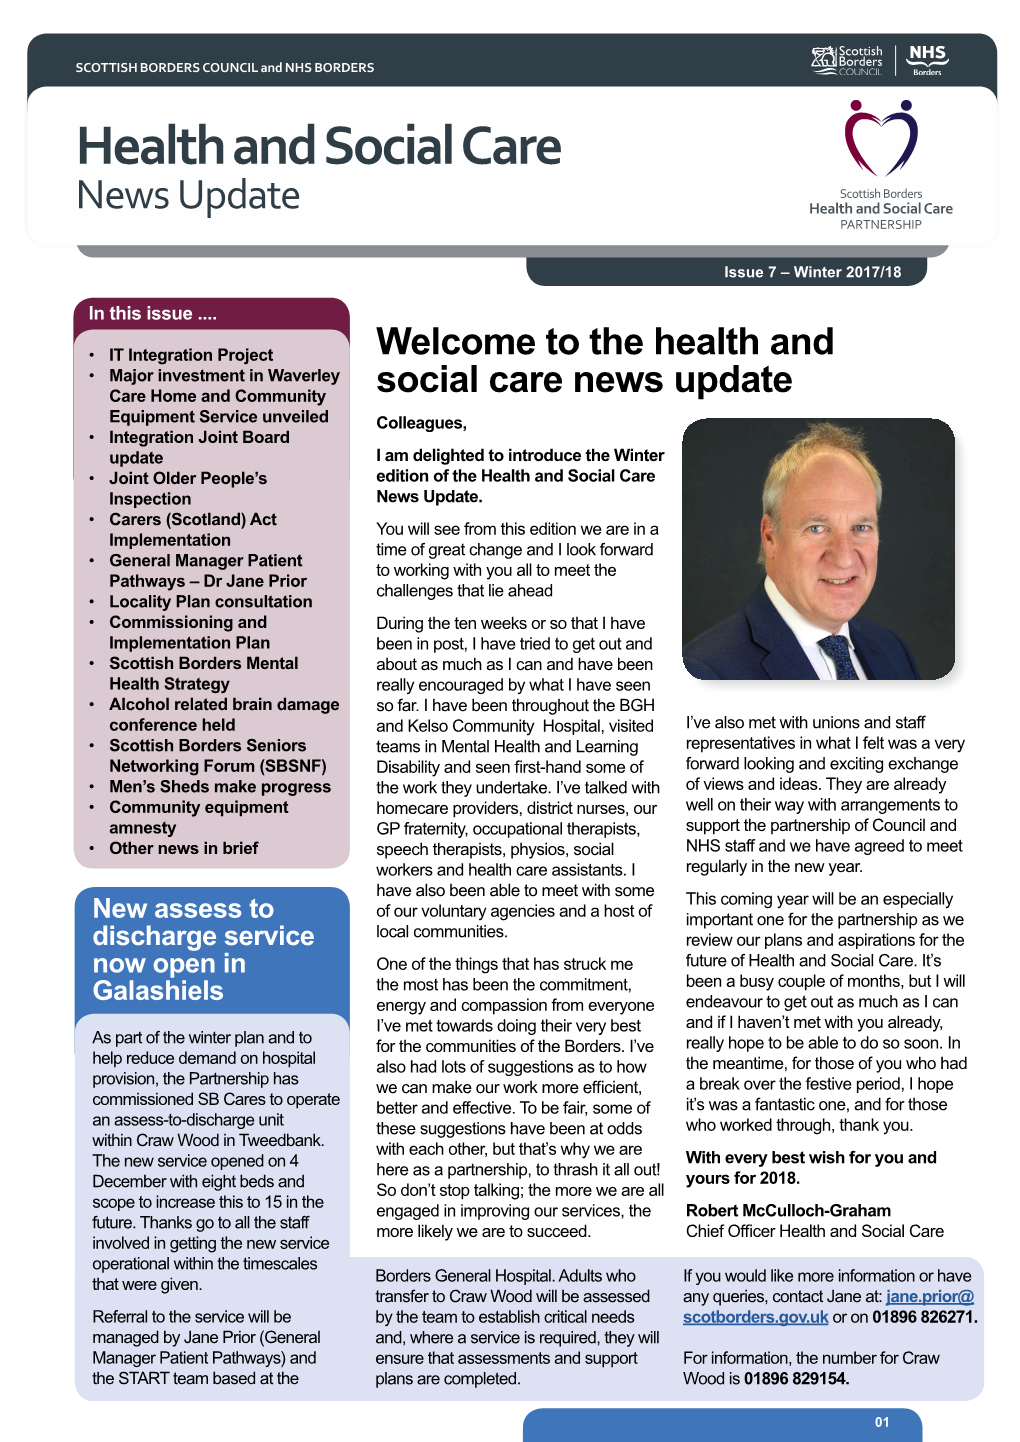 Health and Social Care News Update